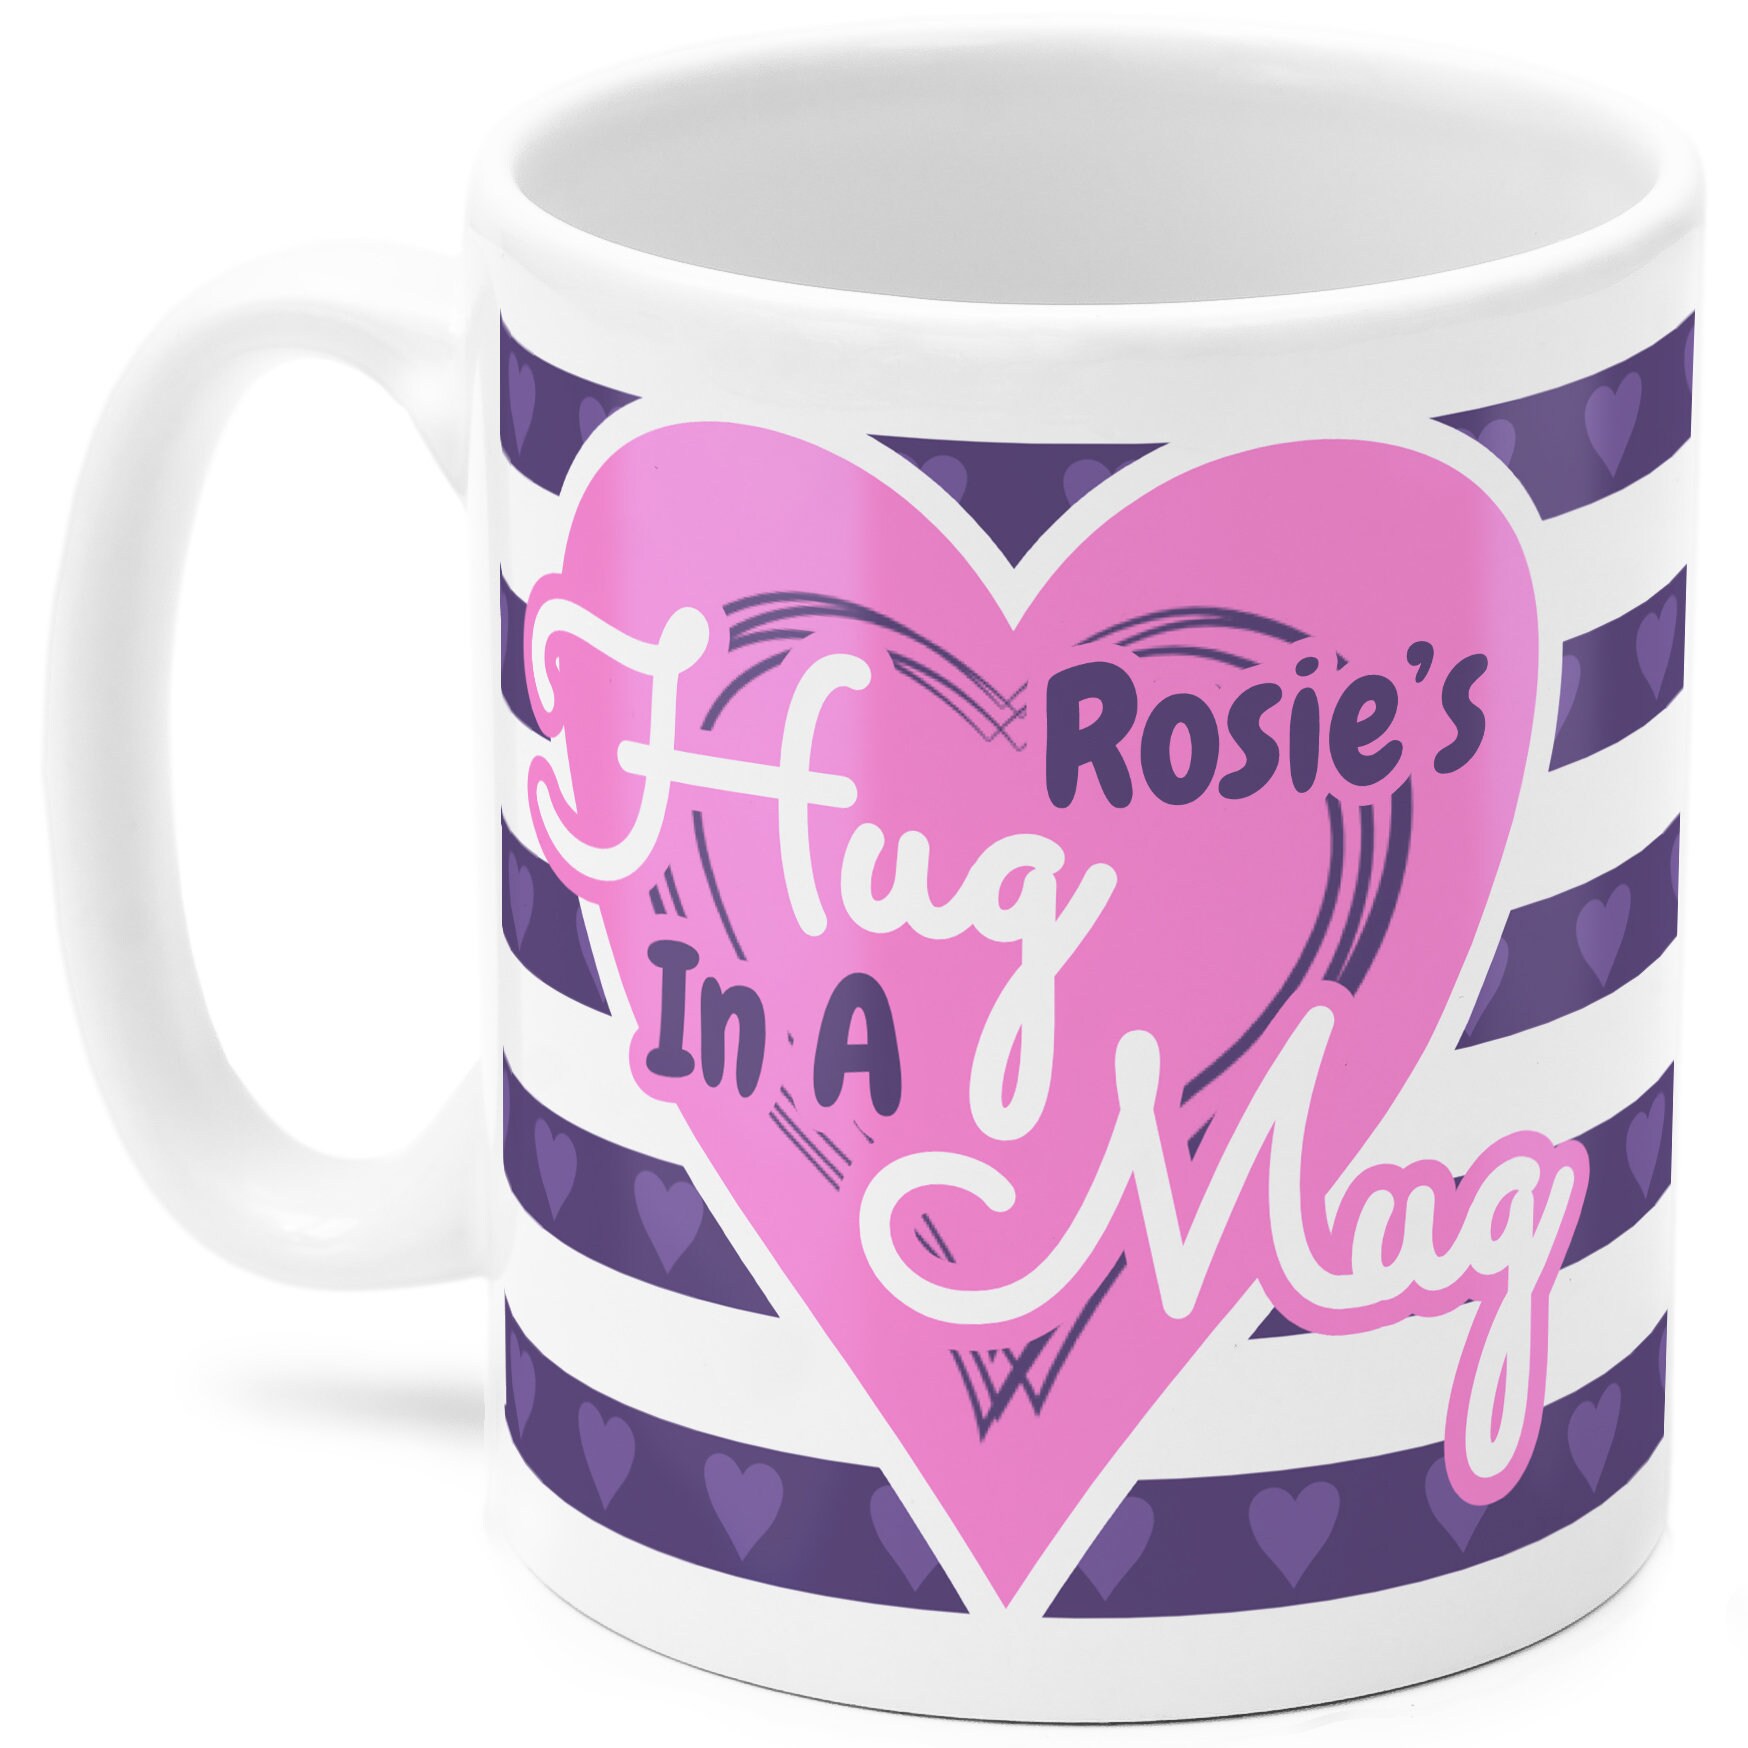 Rosie's Gifts